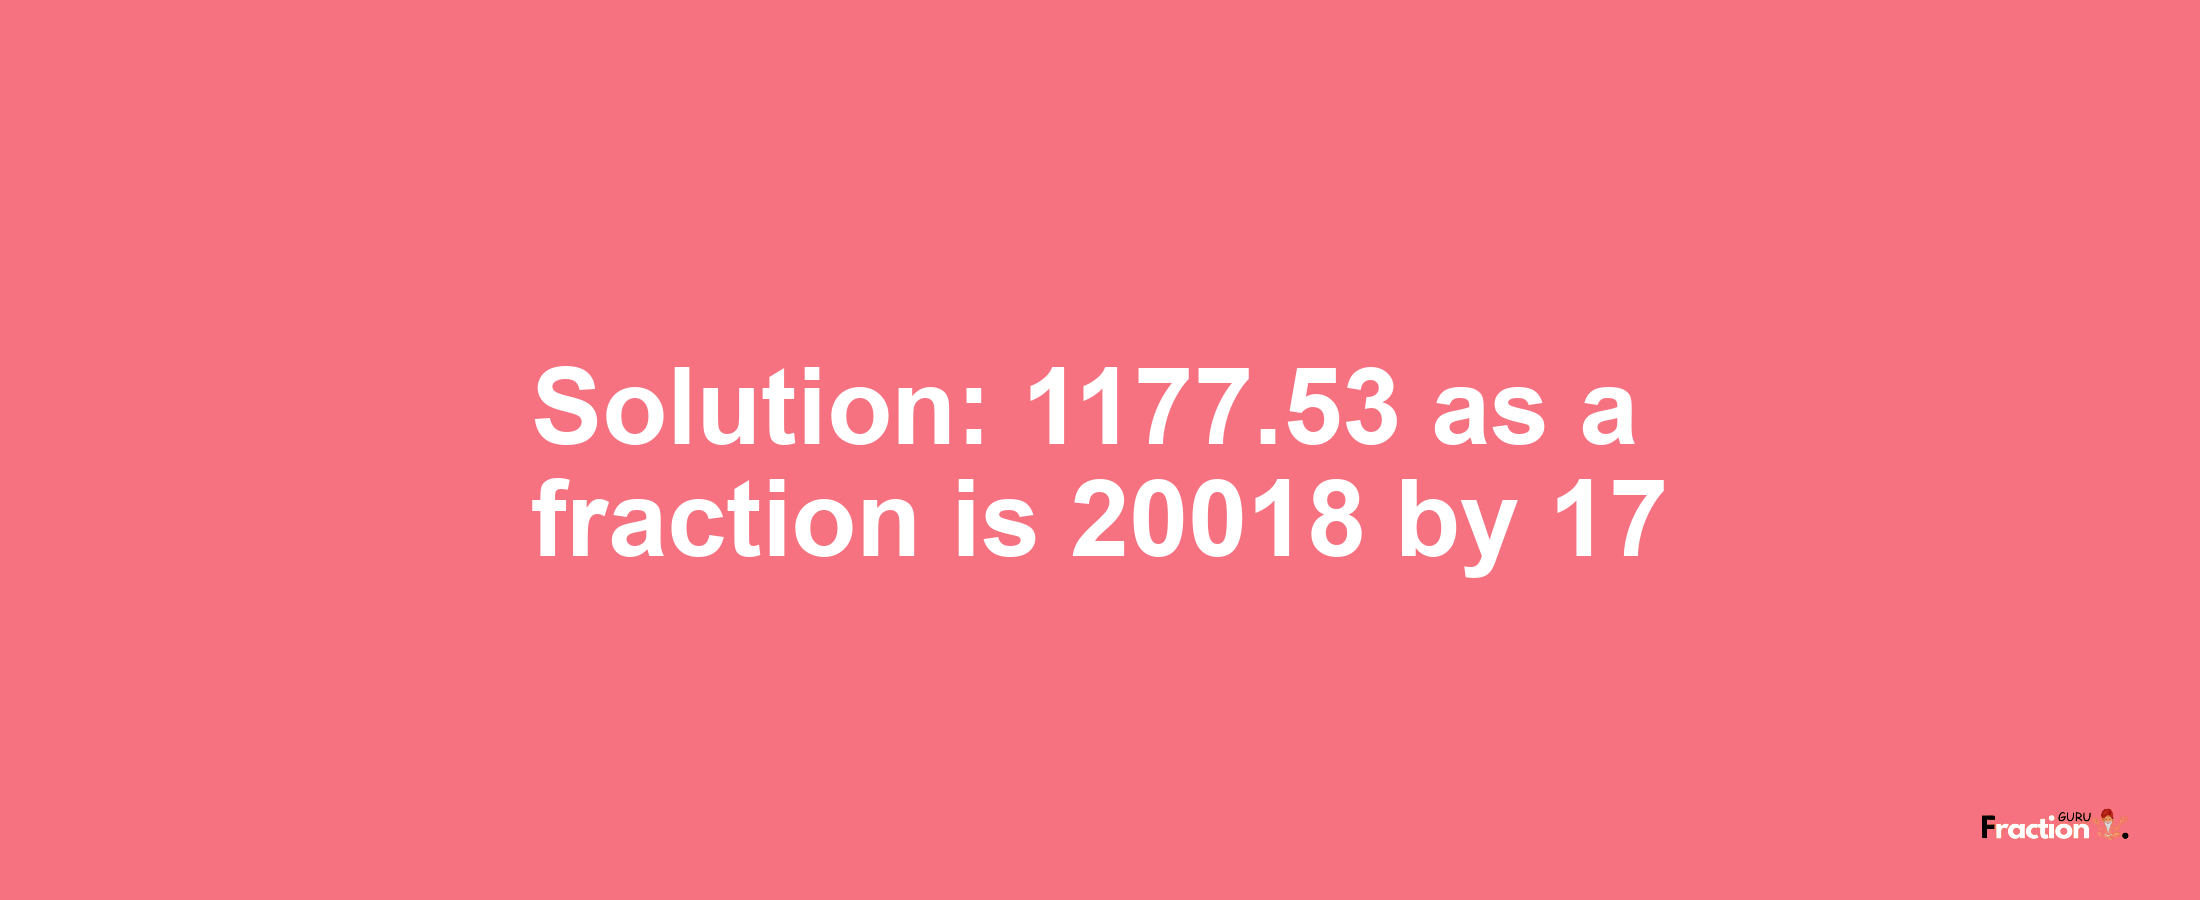 Solution:1177.53 as a fraction is 20018/17